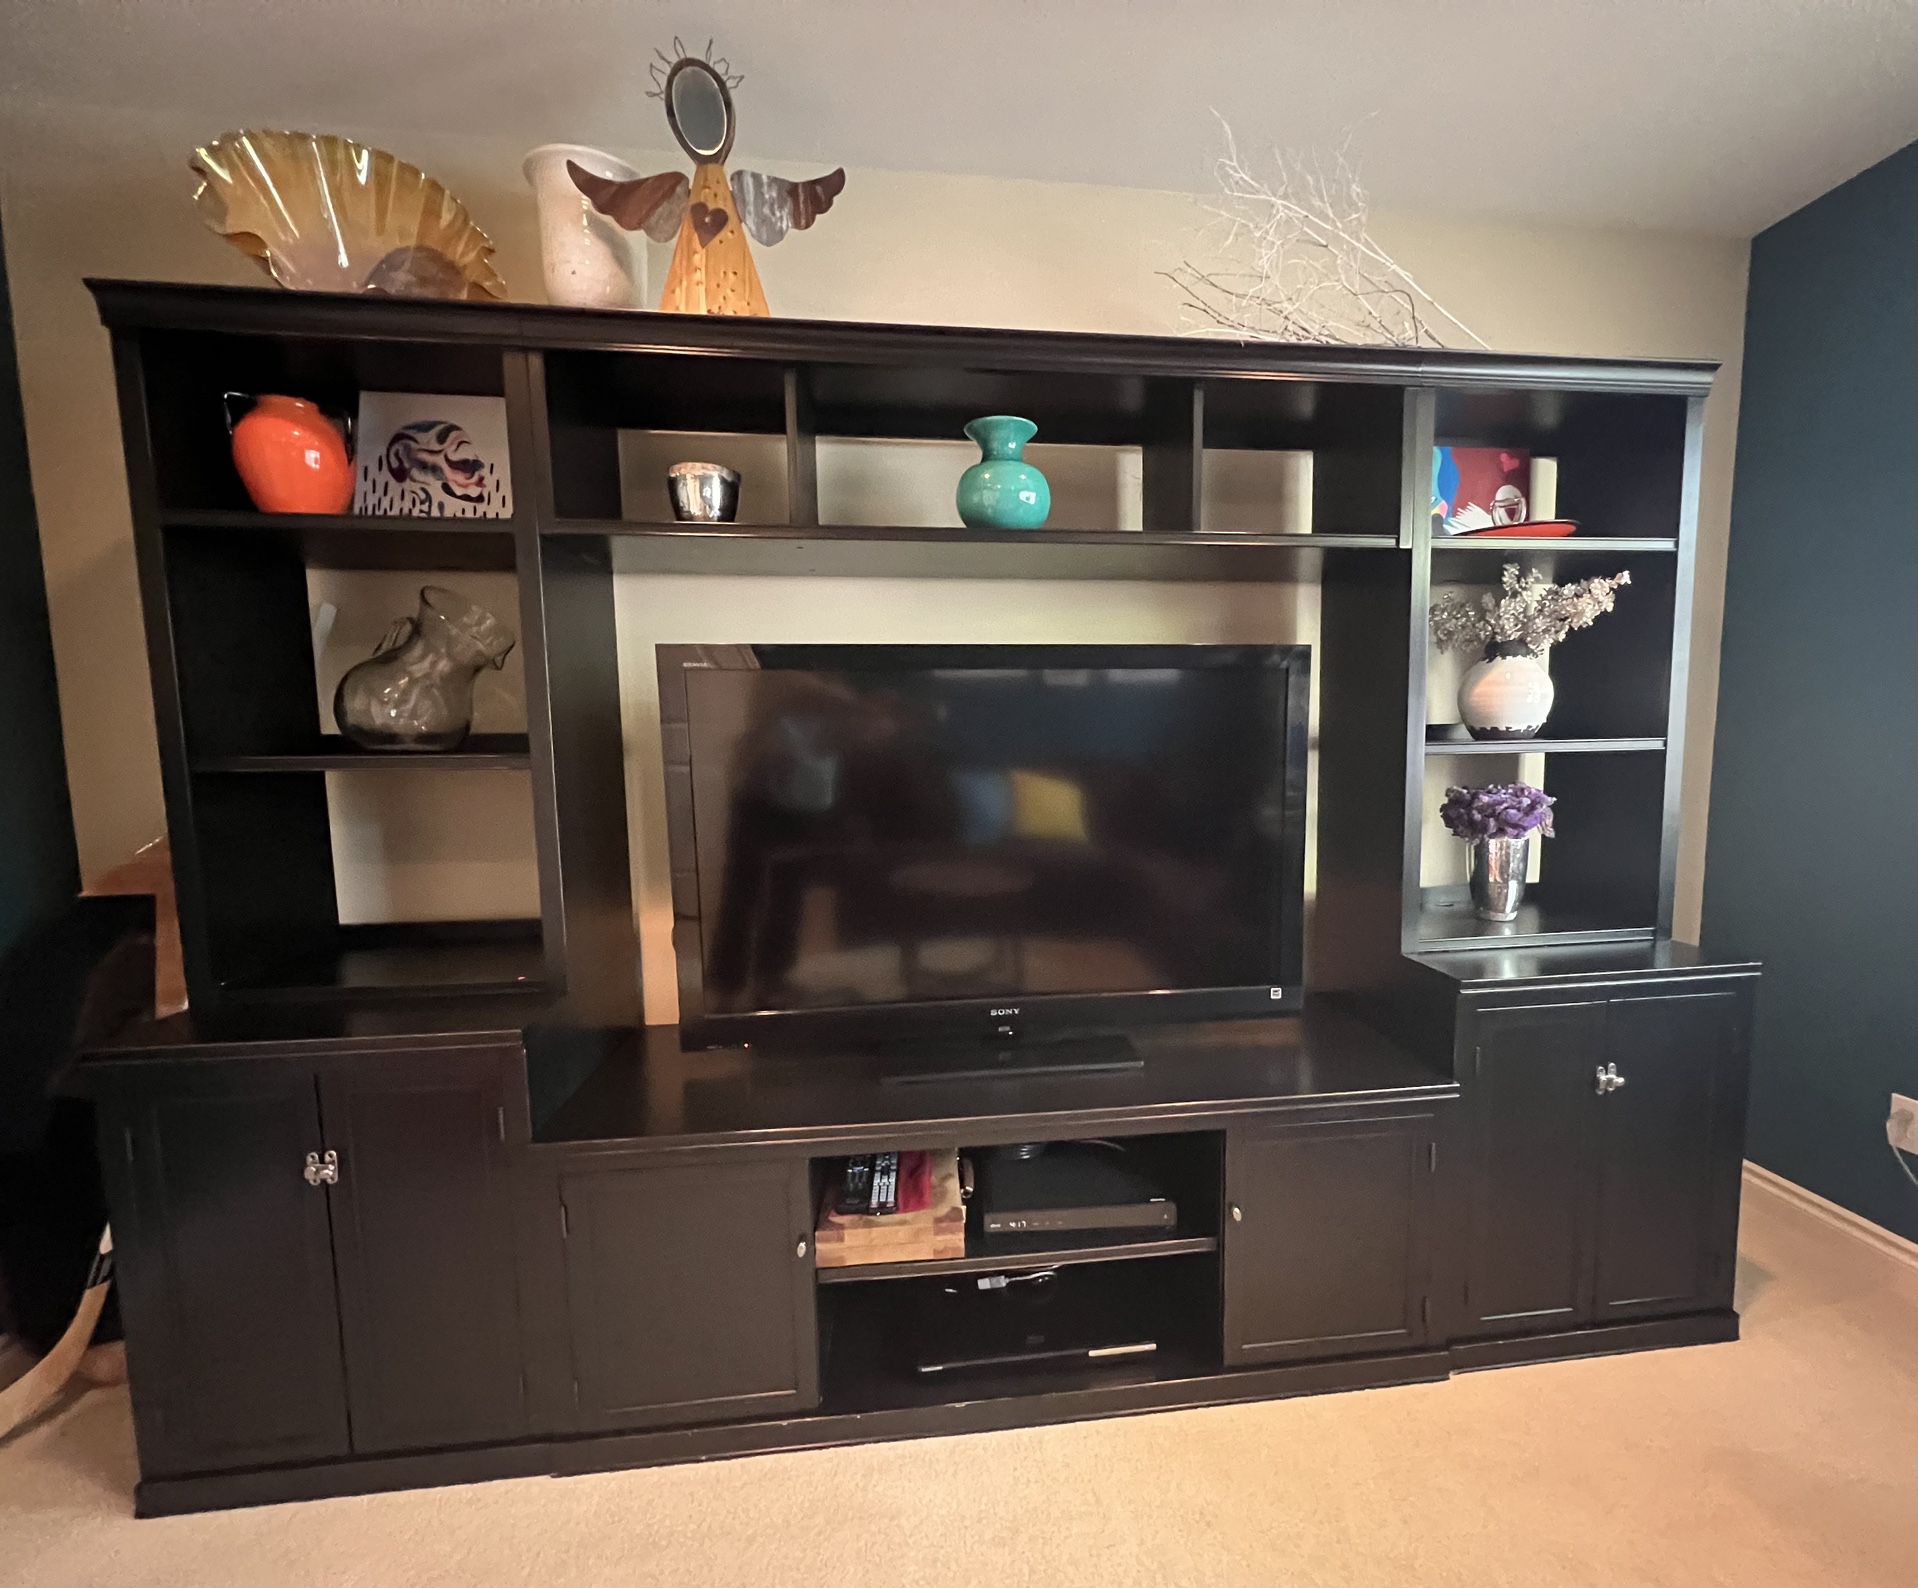 Media Cabinet and shelving